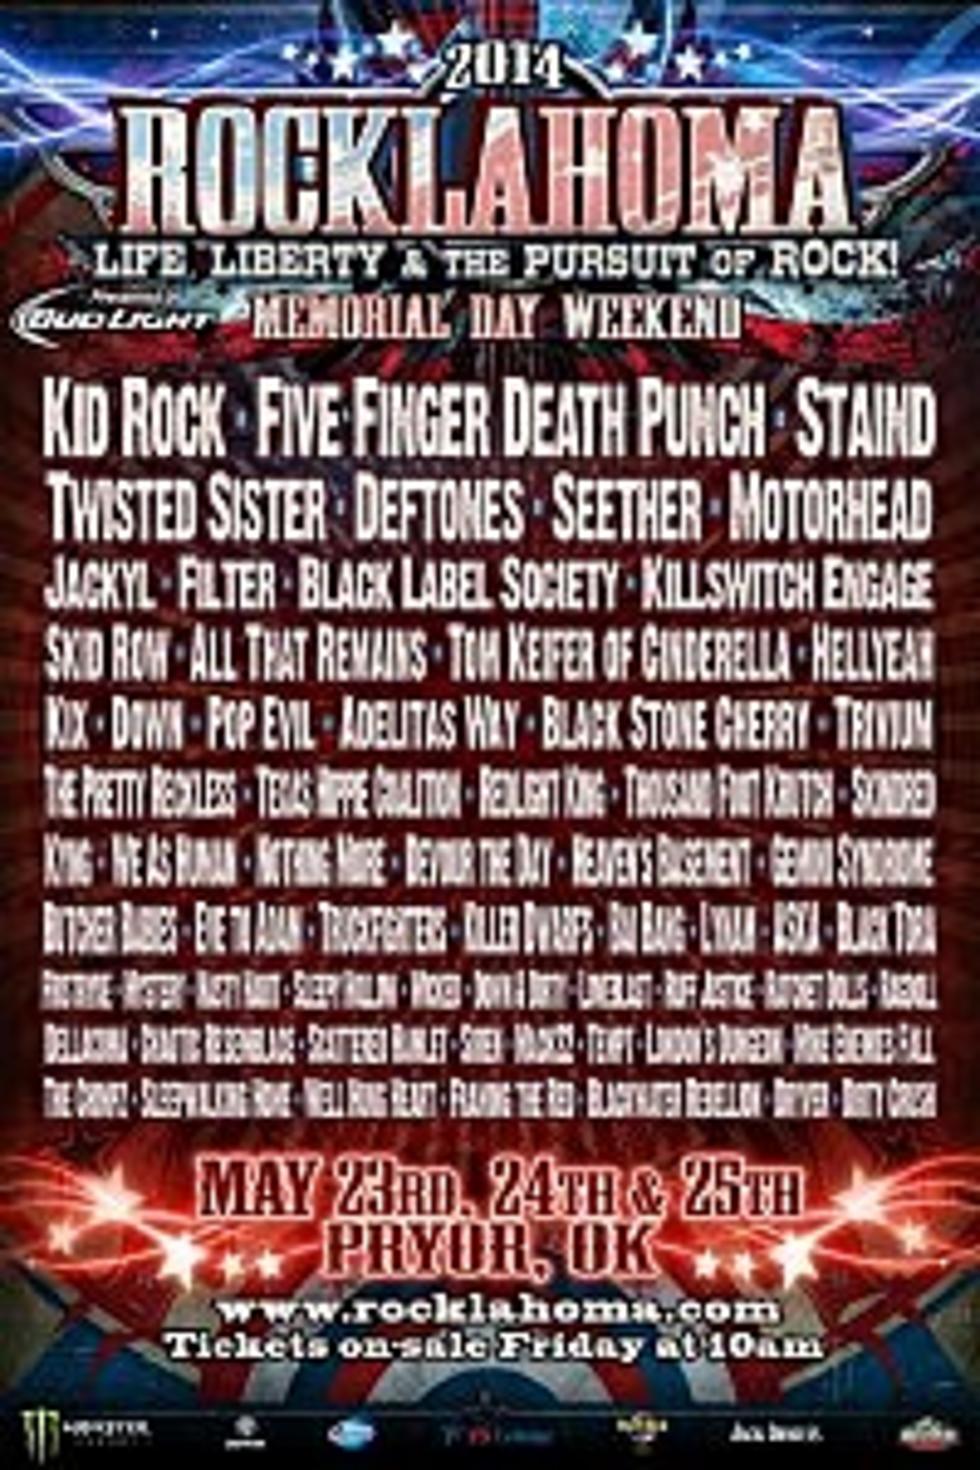 Rocklahoma 2014 Ticket Winner Announced!